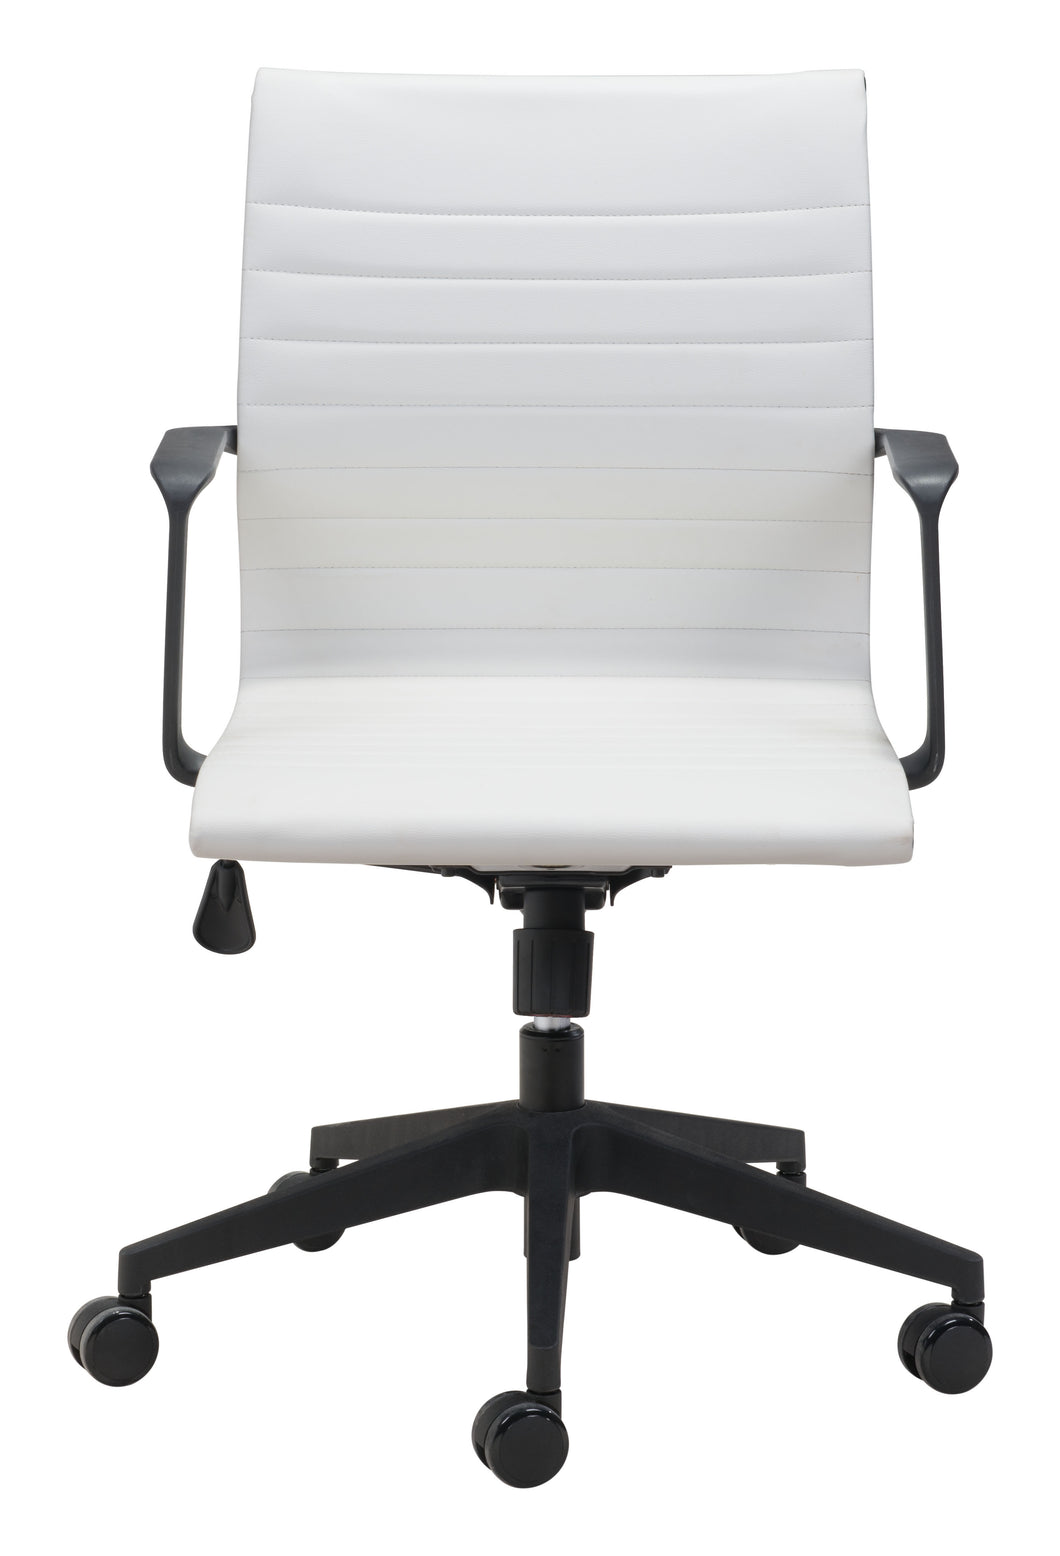 White Modern Office Chair with Elegant Contrasting Black Frame